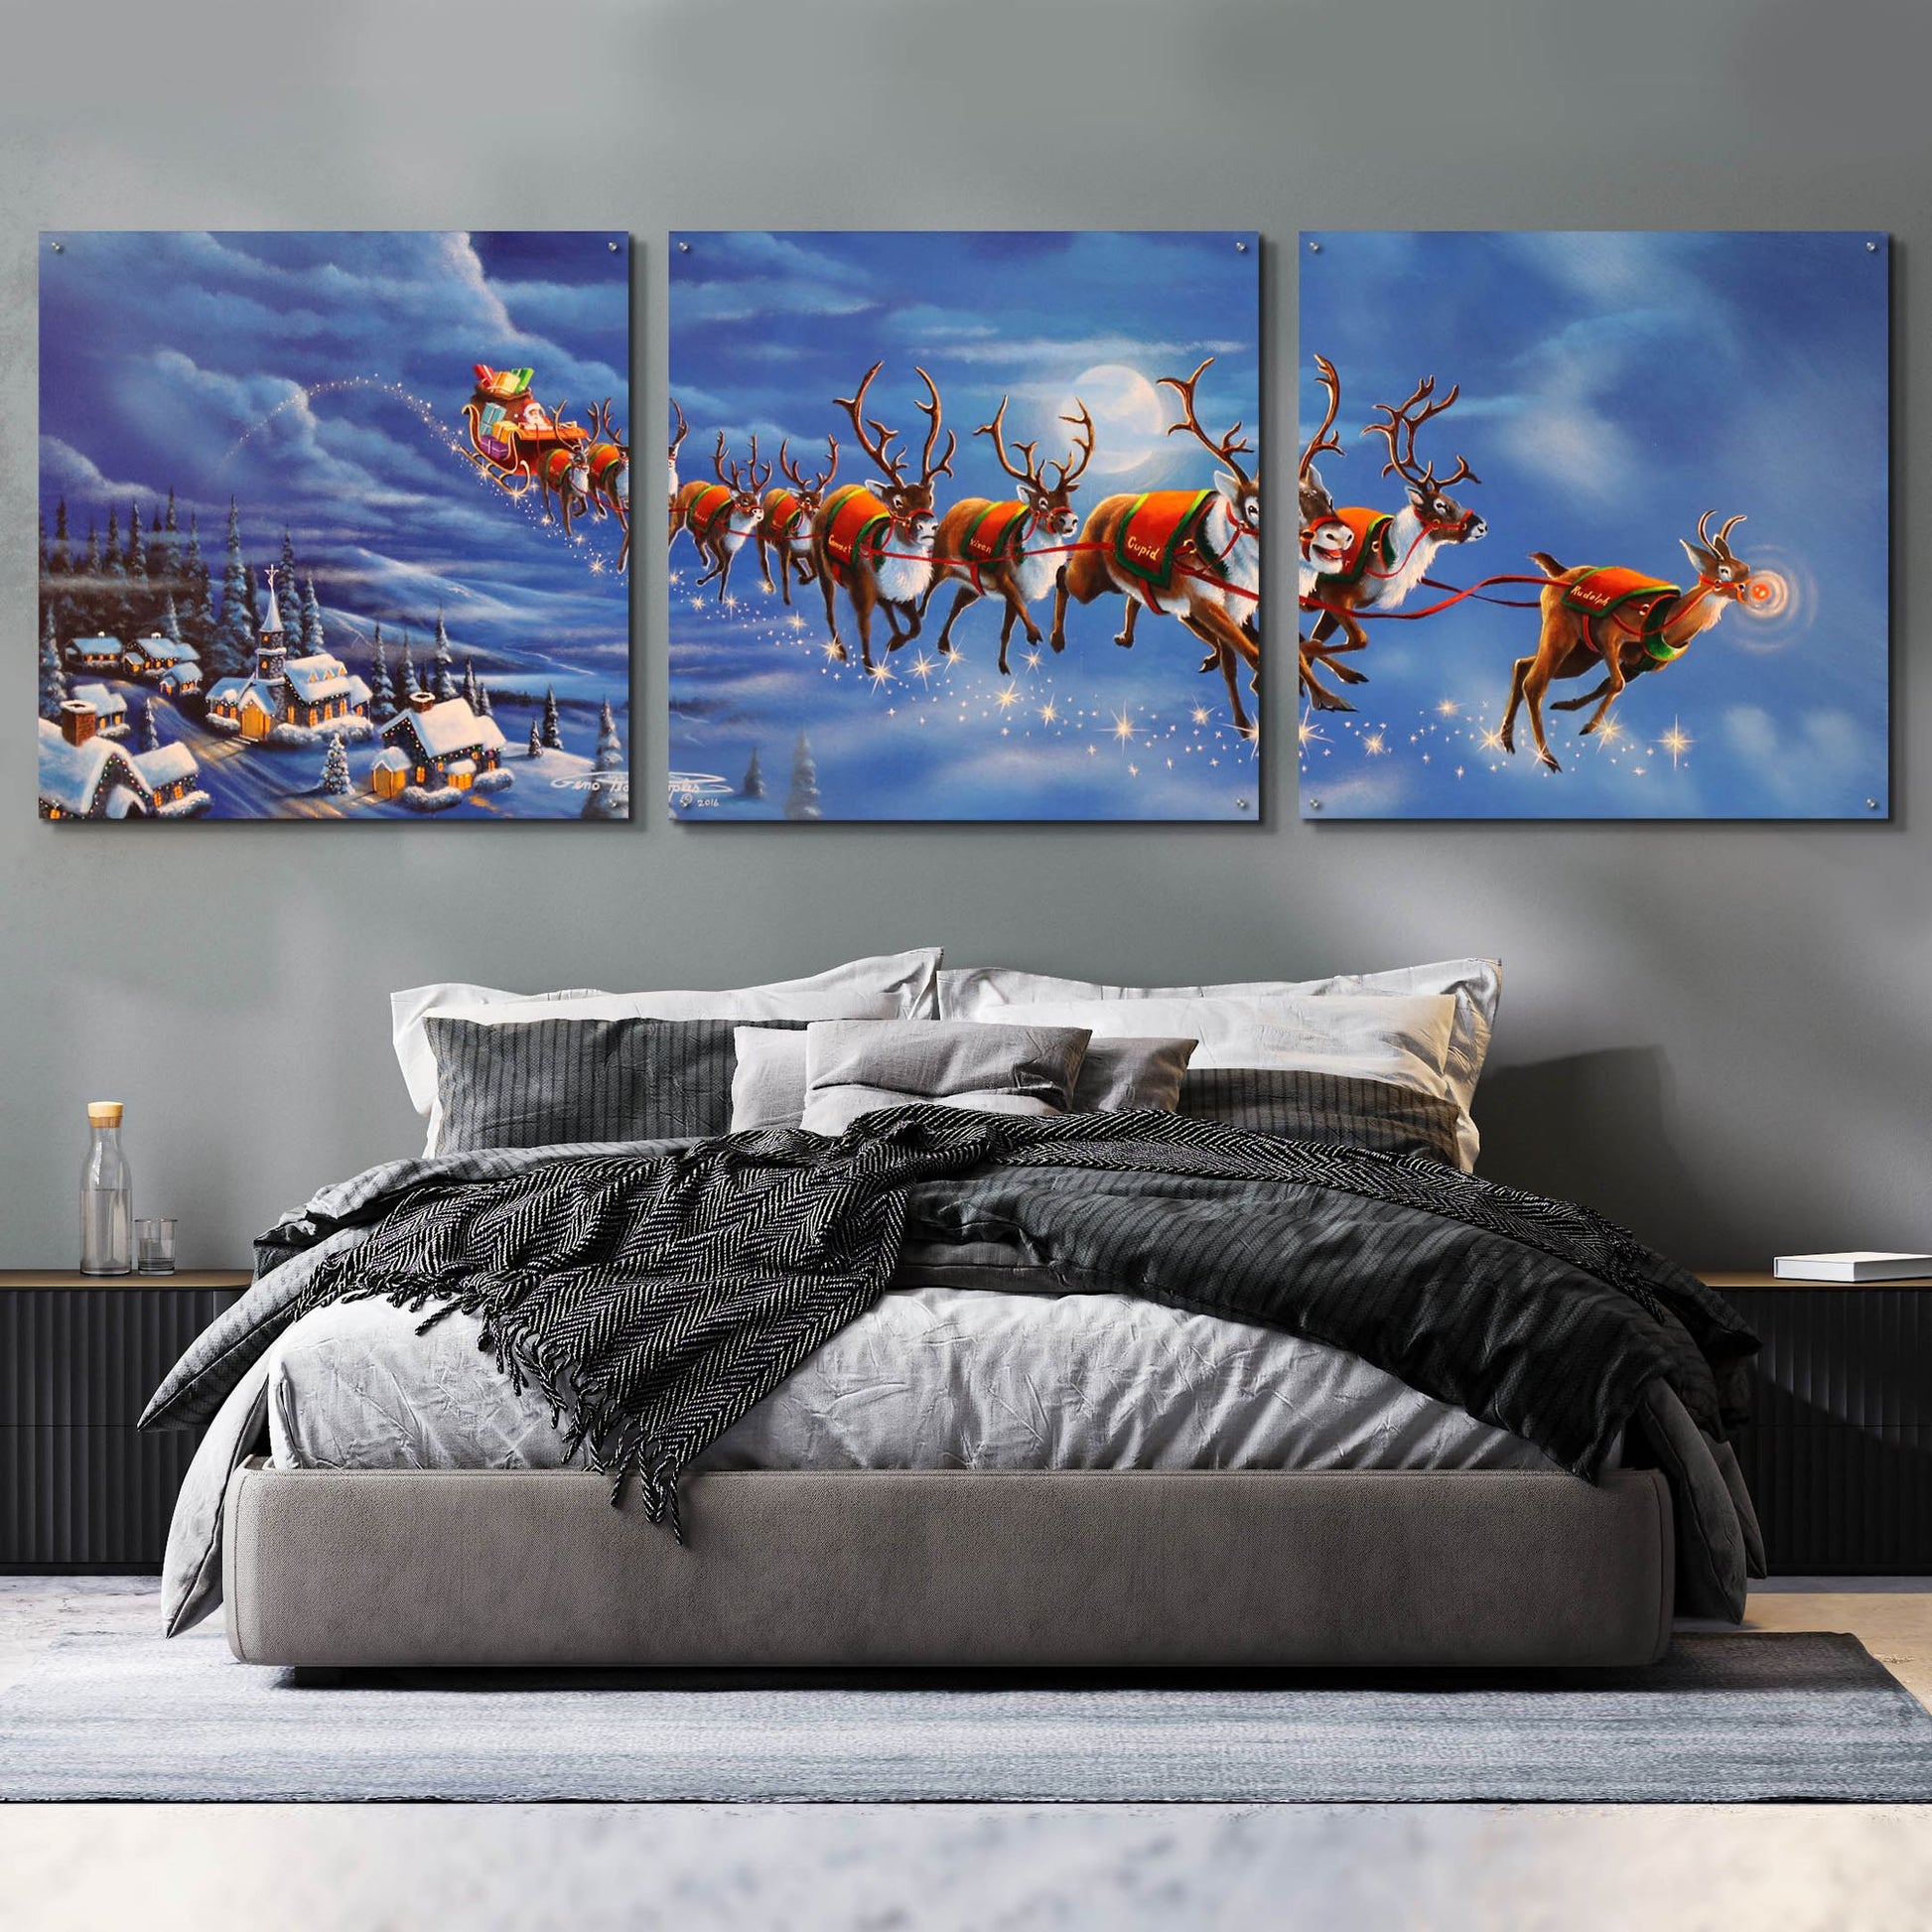 Epic Art 'Twas The Night Before Christmas' by Geno Peoples, Acrylic Glass Wall Art, 3 Piece Set,108x36